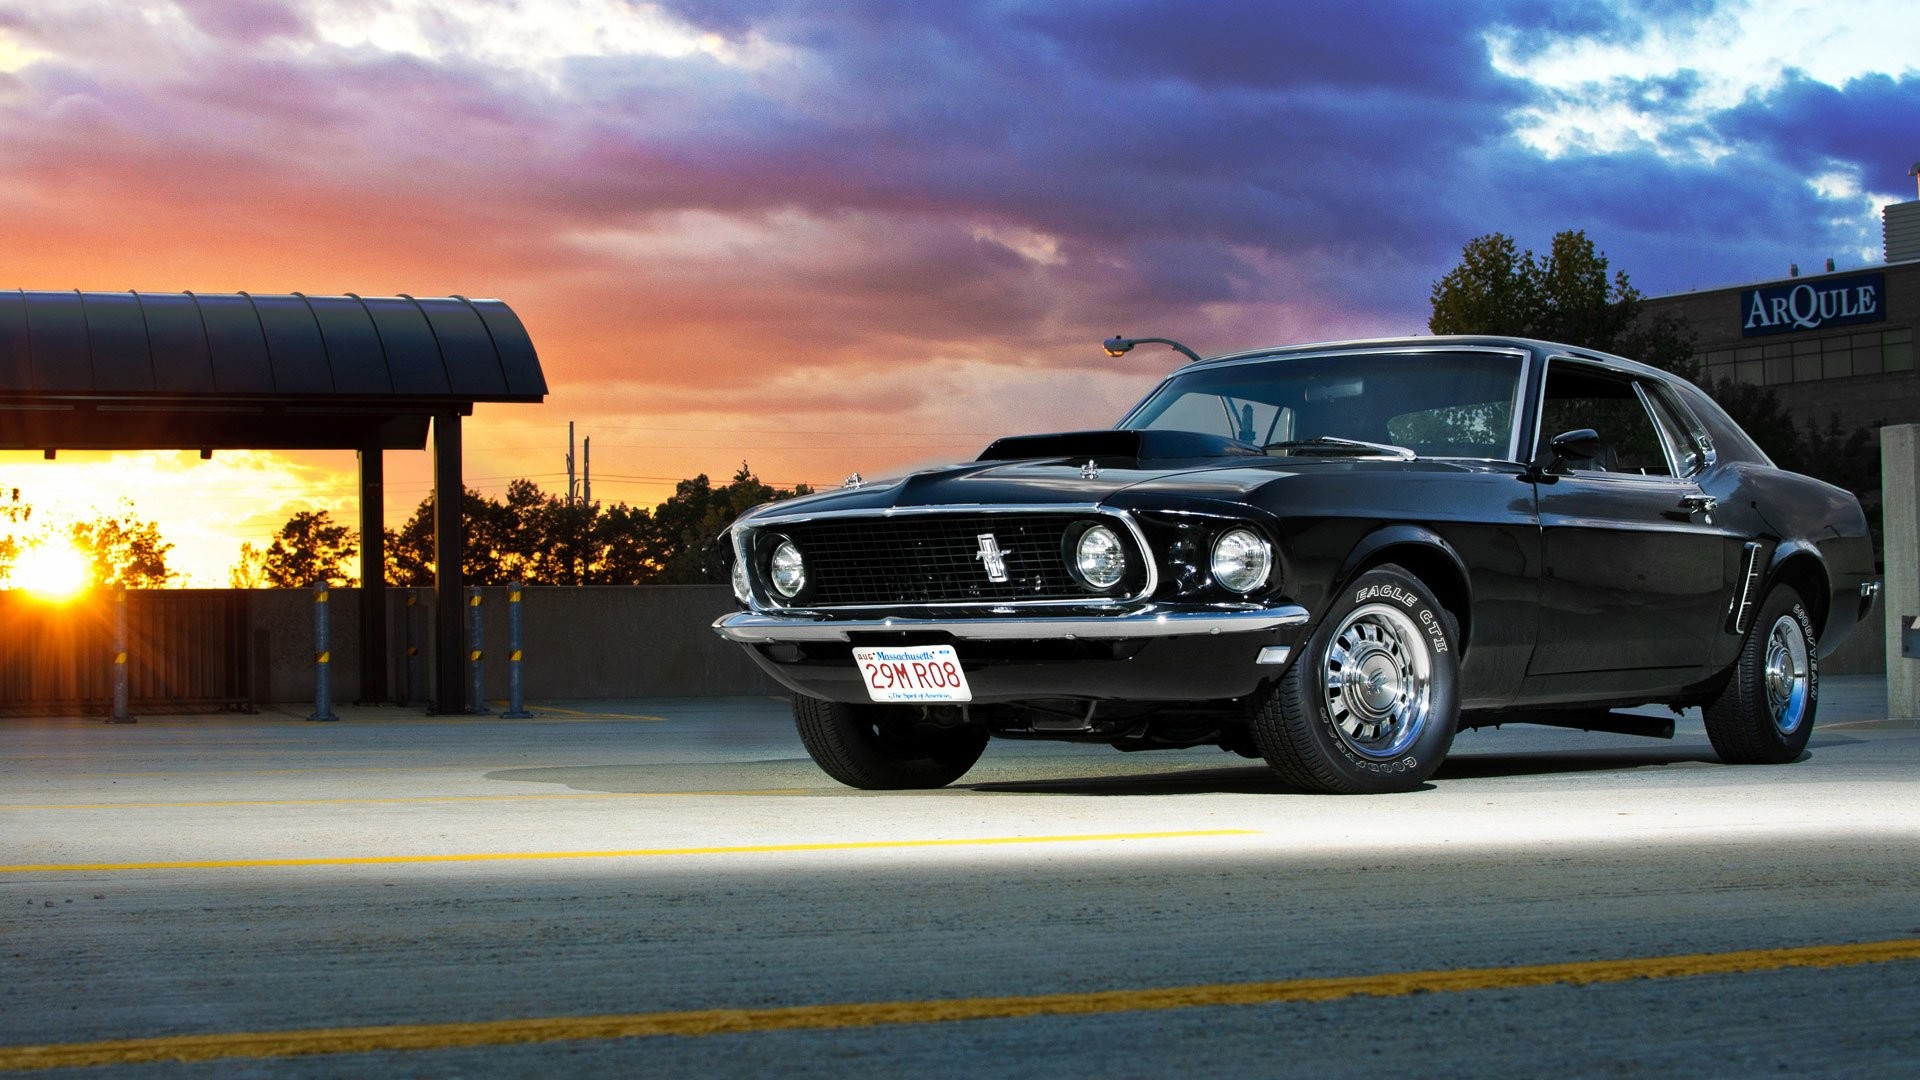 Classic Mustang wallpaper by Zackp13 - Download on ZEDGE™ | b3b7